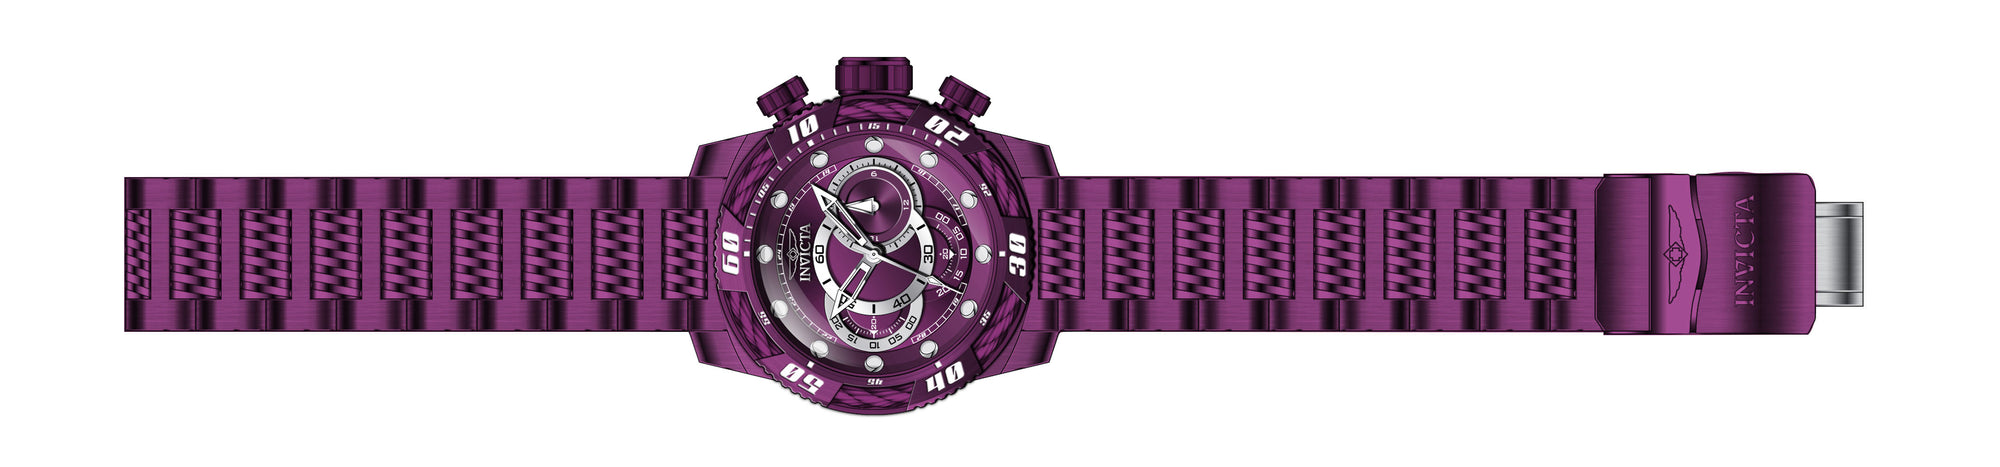 Band for Invicta Speedway Men 40773